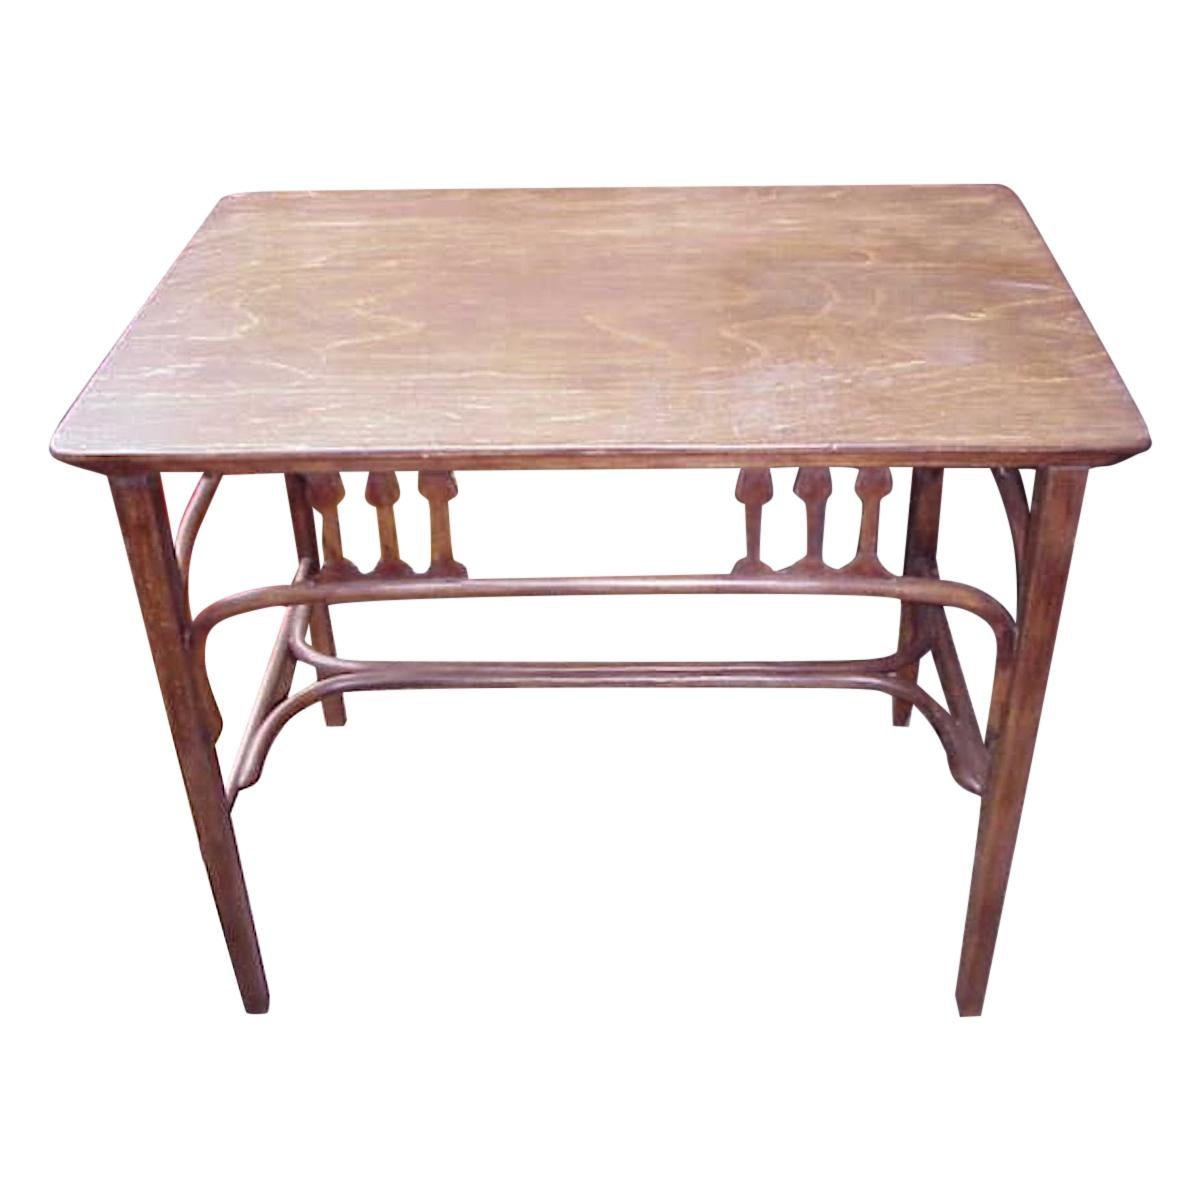 Gustav Siegel, for Jacob & Josef Kohn, a Vienna Secessionist Bentwood Table For Sale